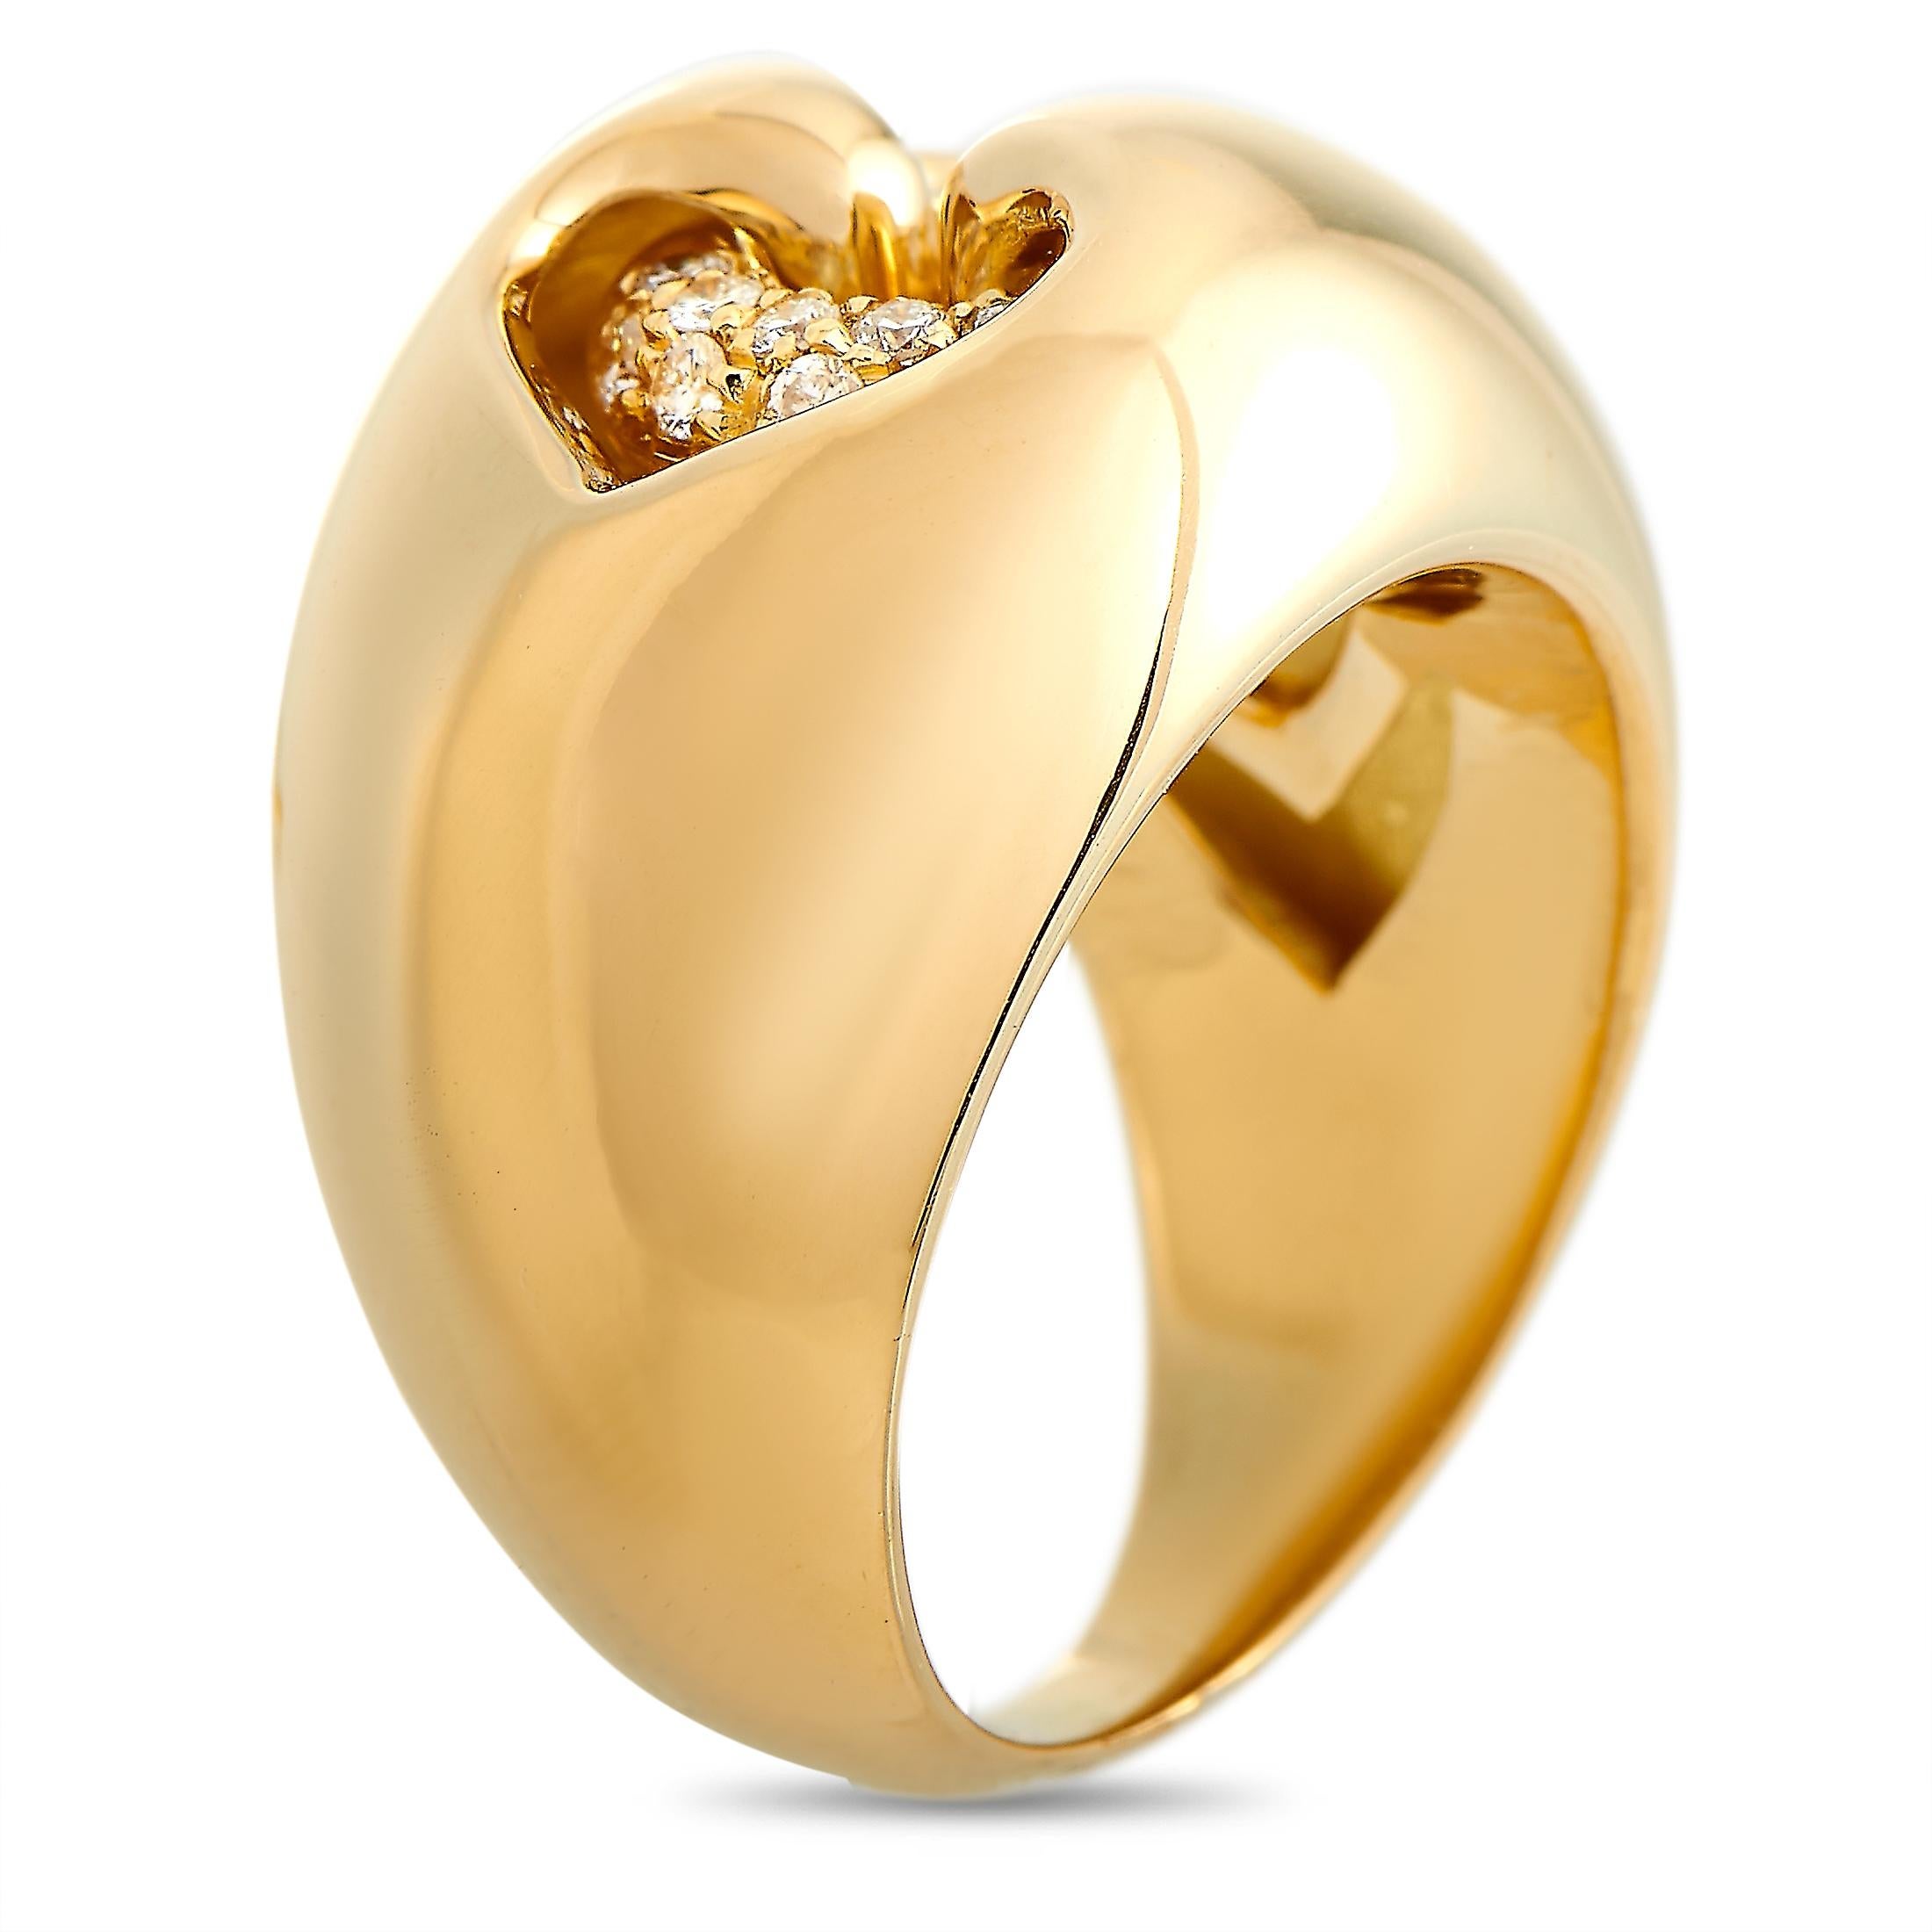 This Bvlgari ring is made of 18K yellow gold and embellished with diamonds that amount to 0.30 carats. The ring weighs 15.3 grams and boasts band thickness of 3 mm and top height of 5 mm, while top dimensions measure 15 by 20 mm.
 
 Offered in